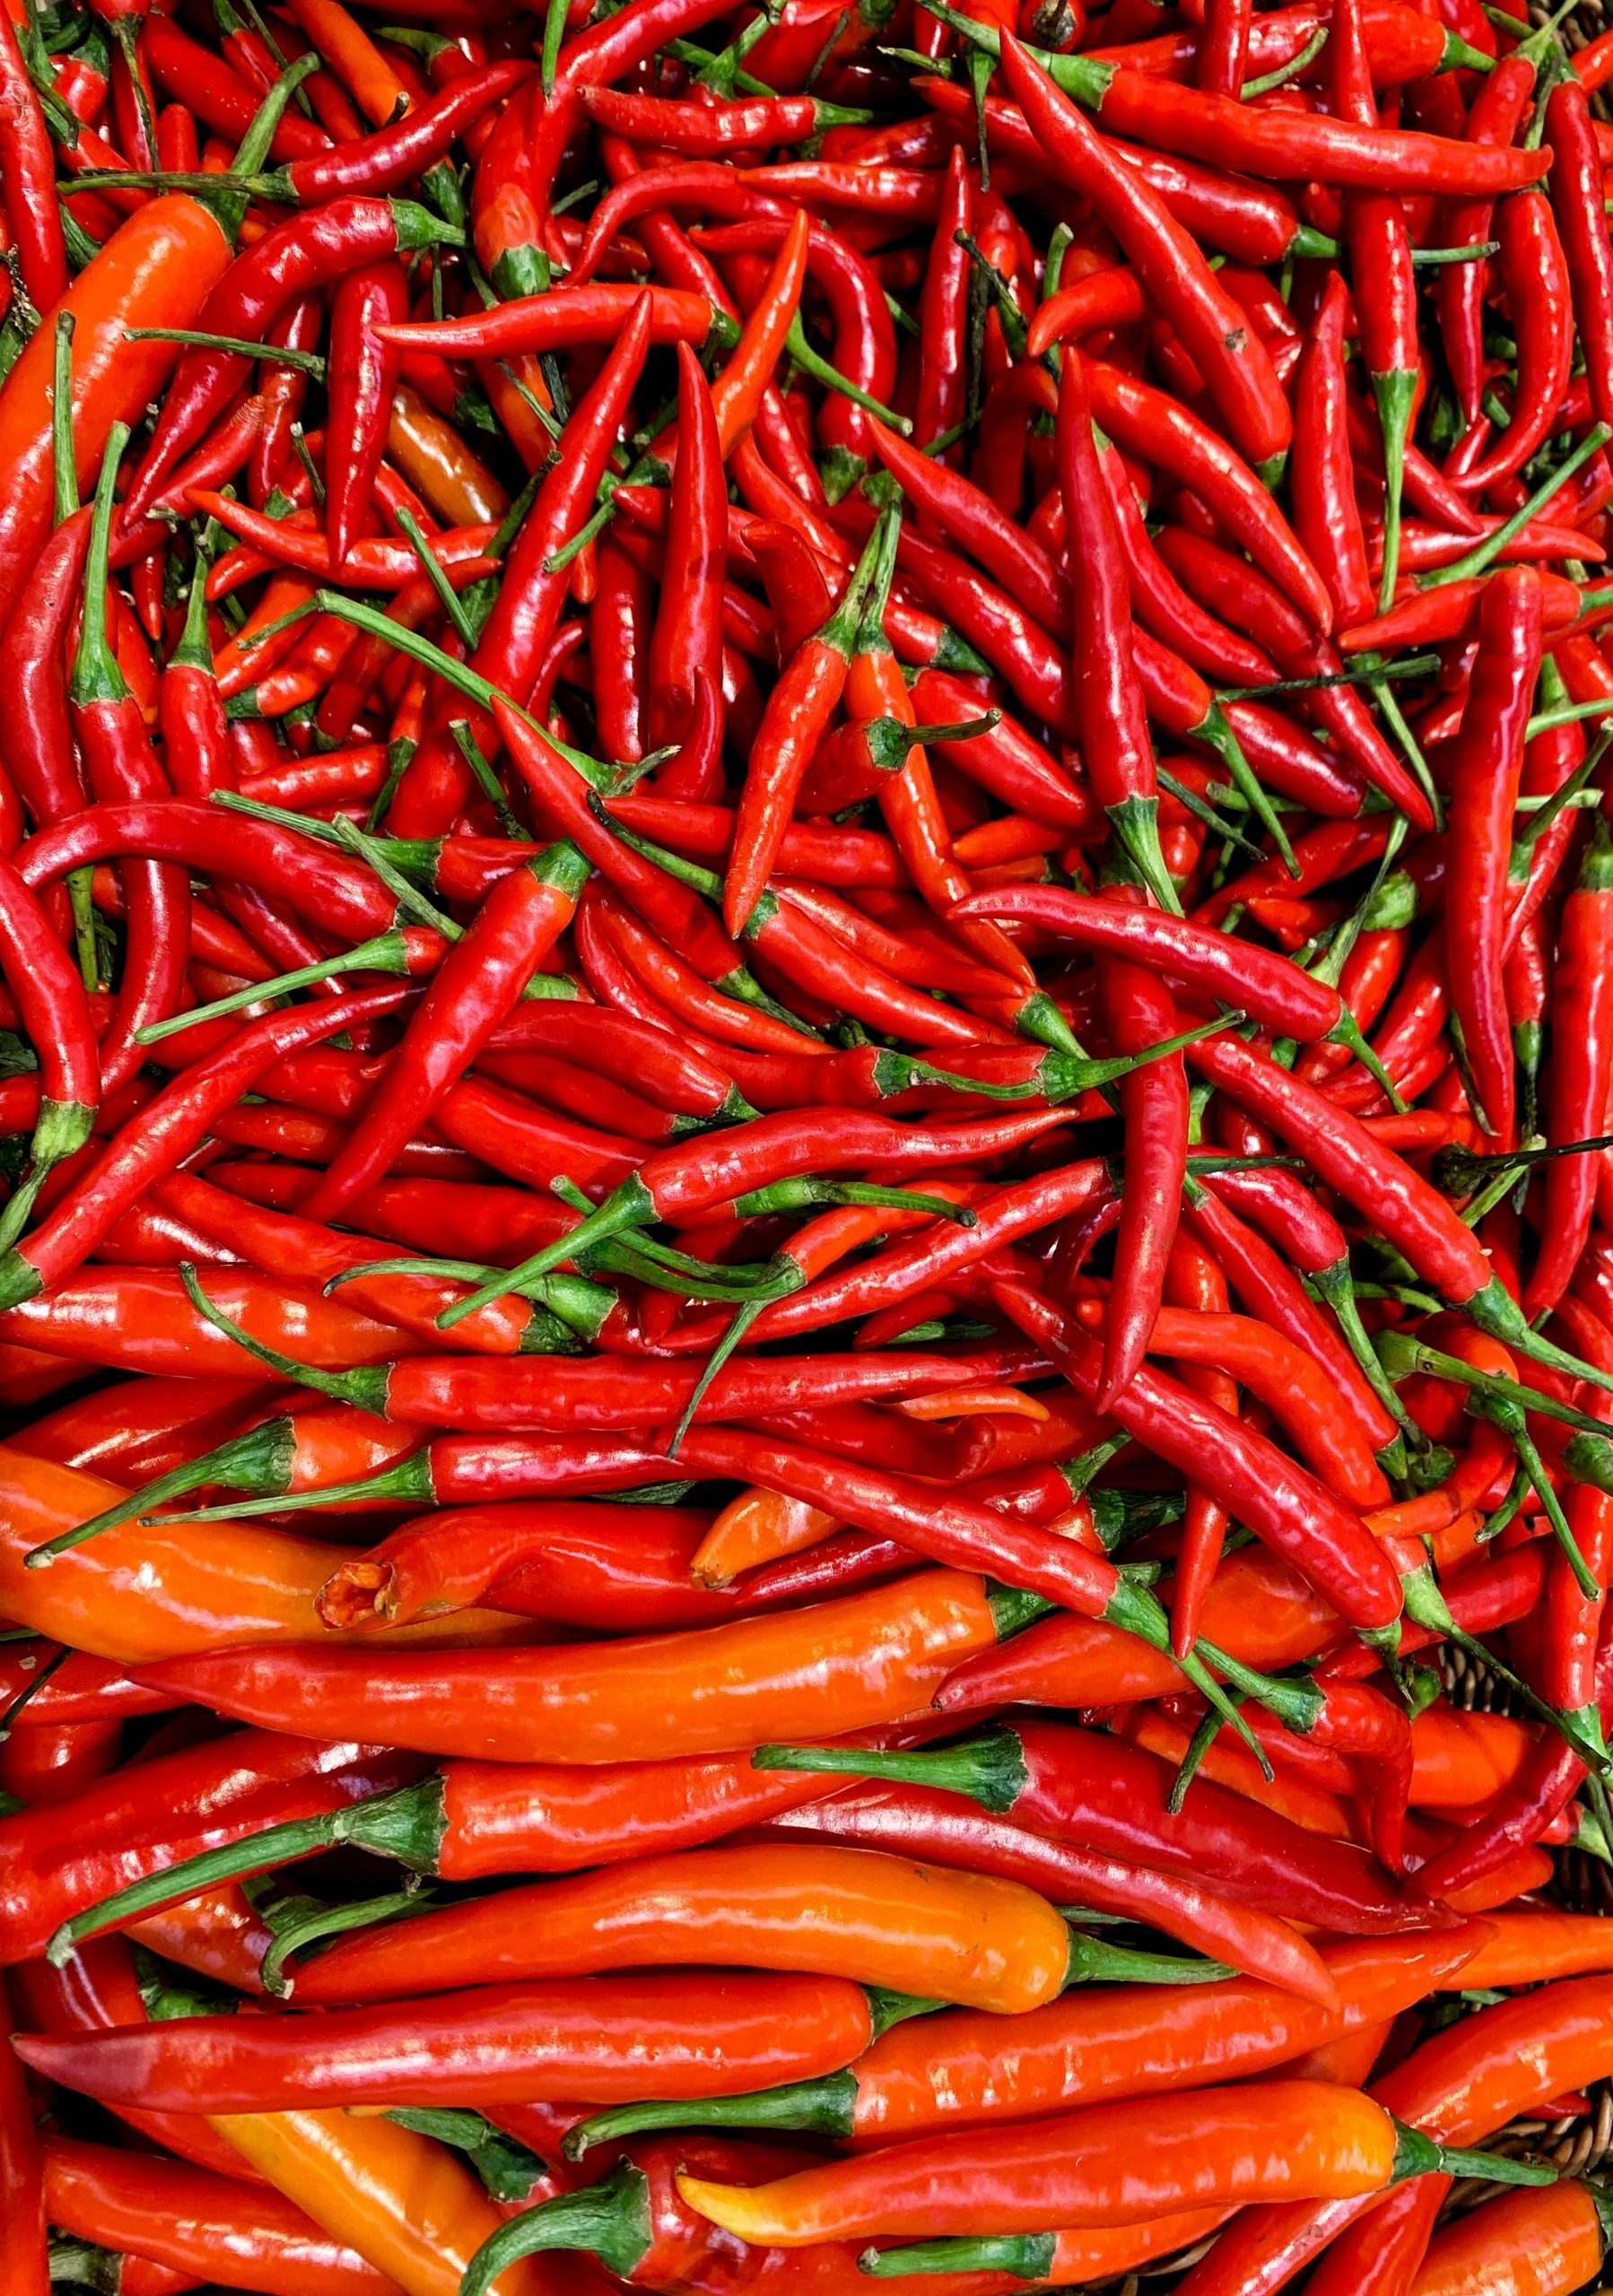 lots of red hot chilli peppers all together